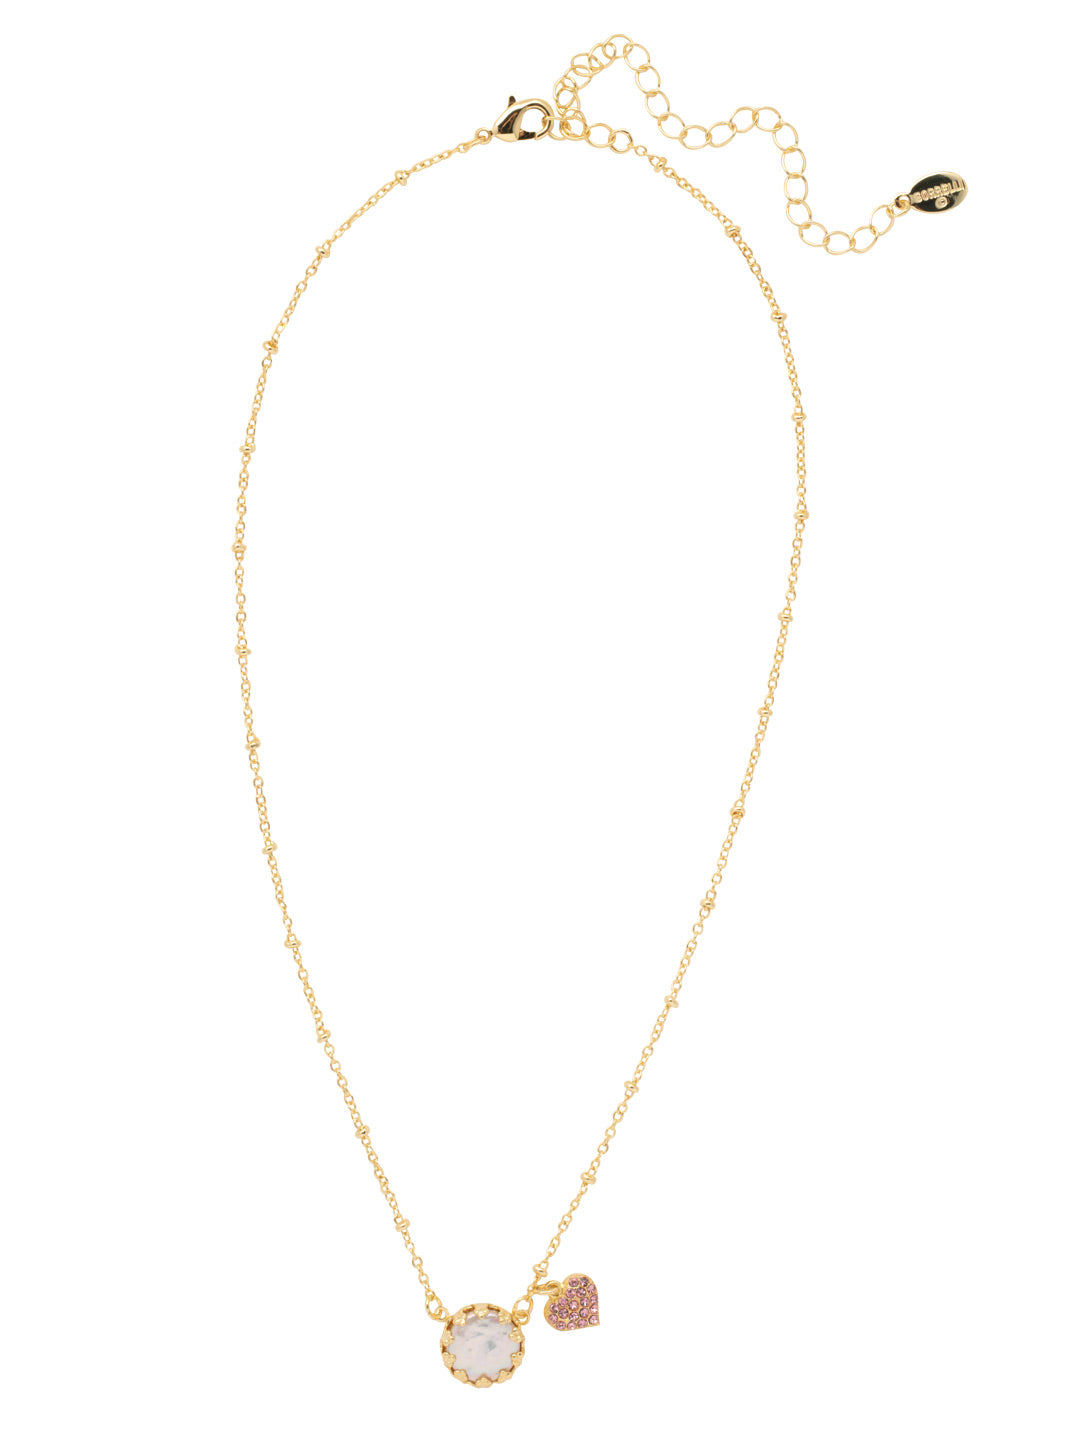 Isabella Heart Pendant Necklace - NFD79BGFSK - <p>The Isabella Heart Pendant Necklace features a freshwater pearl nestled in a ruffle bezel and a single mini pave heart charm dangling on a thin adjustable chain, secured with a lobster claw clasp. From Sorrelli's First Kiss collection in our Bright Gold-tone finish.</p>